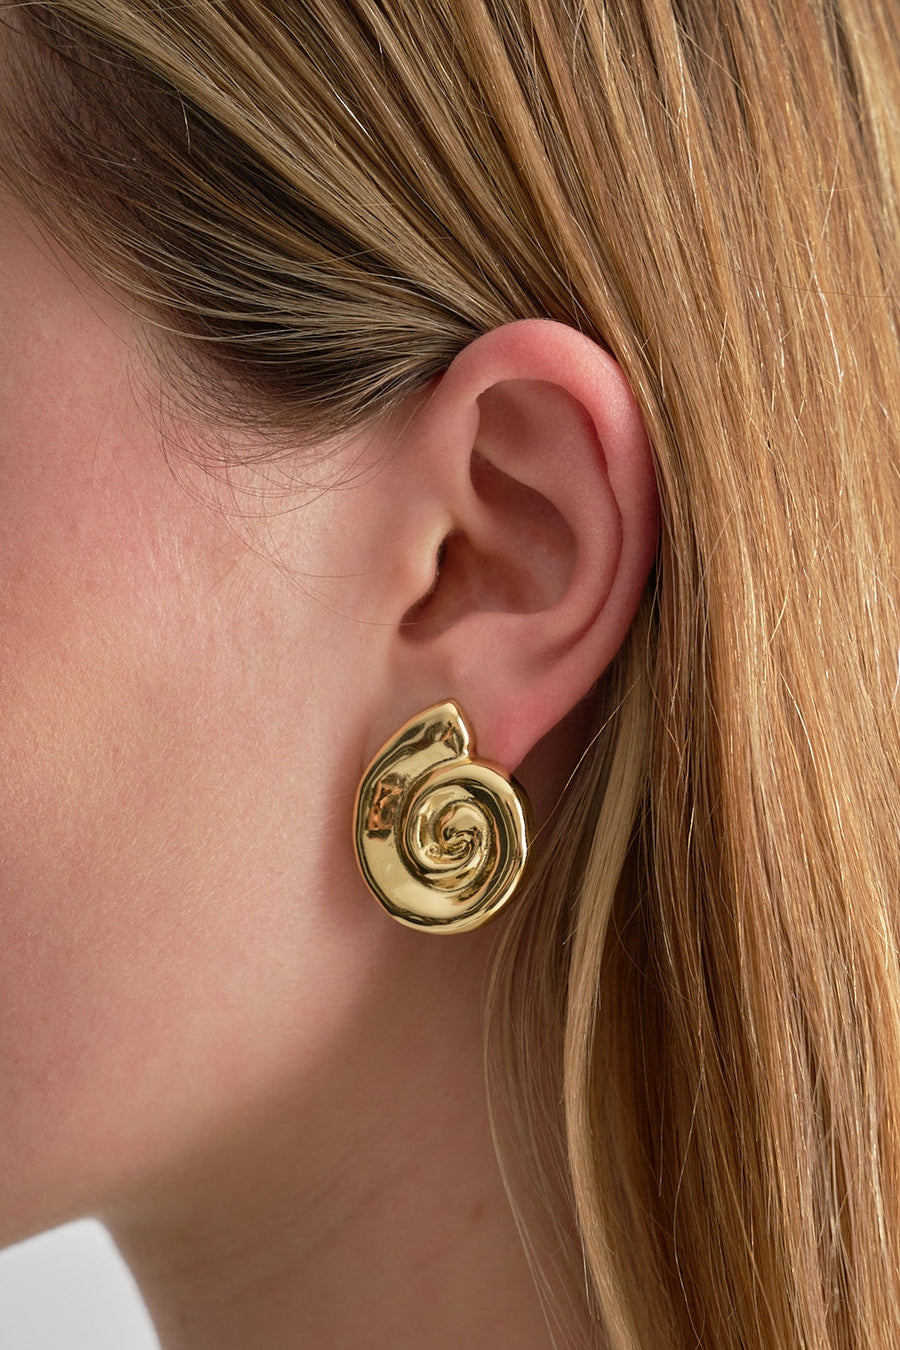 Brie Leon Spiral Earrings - Gold